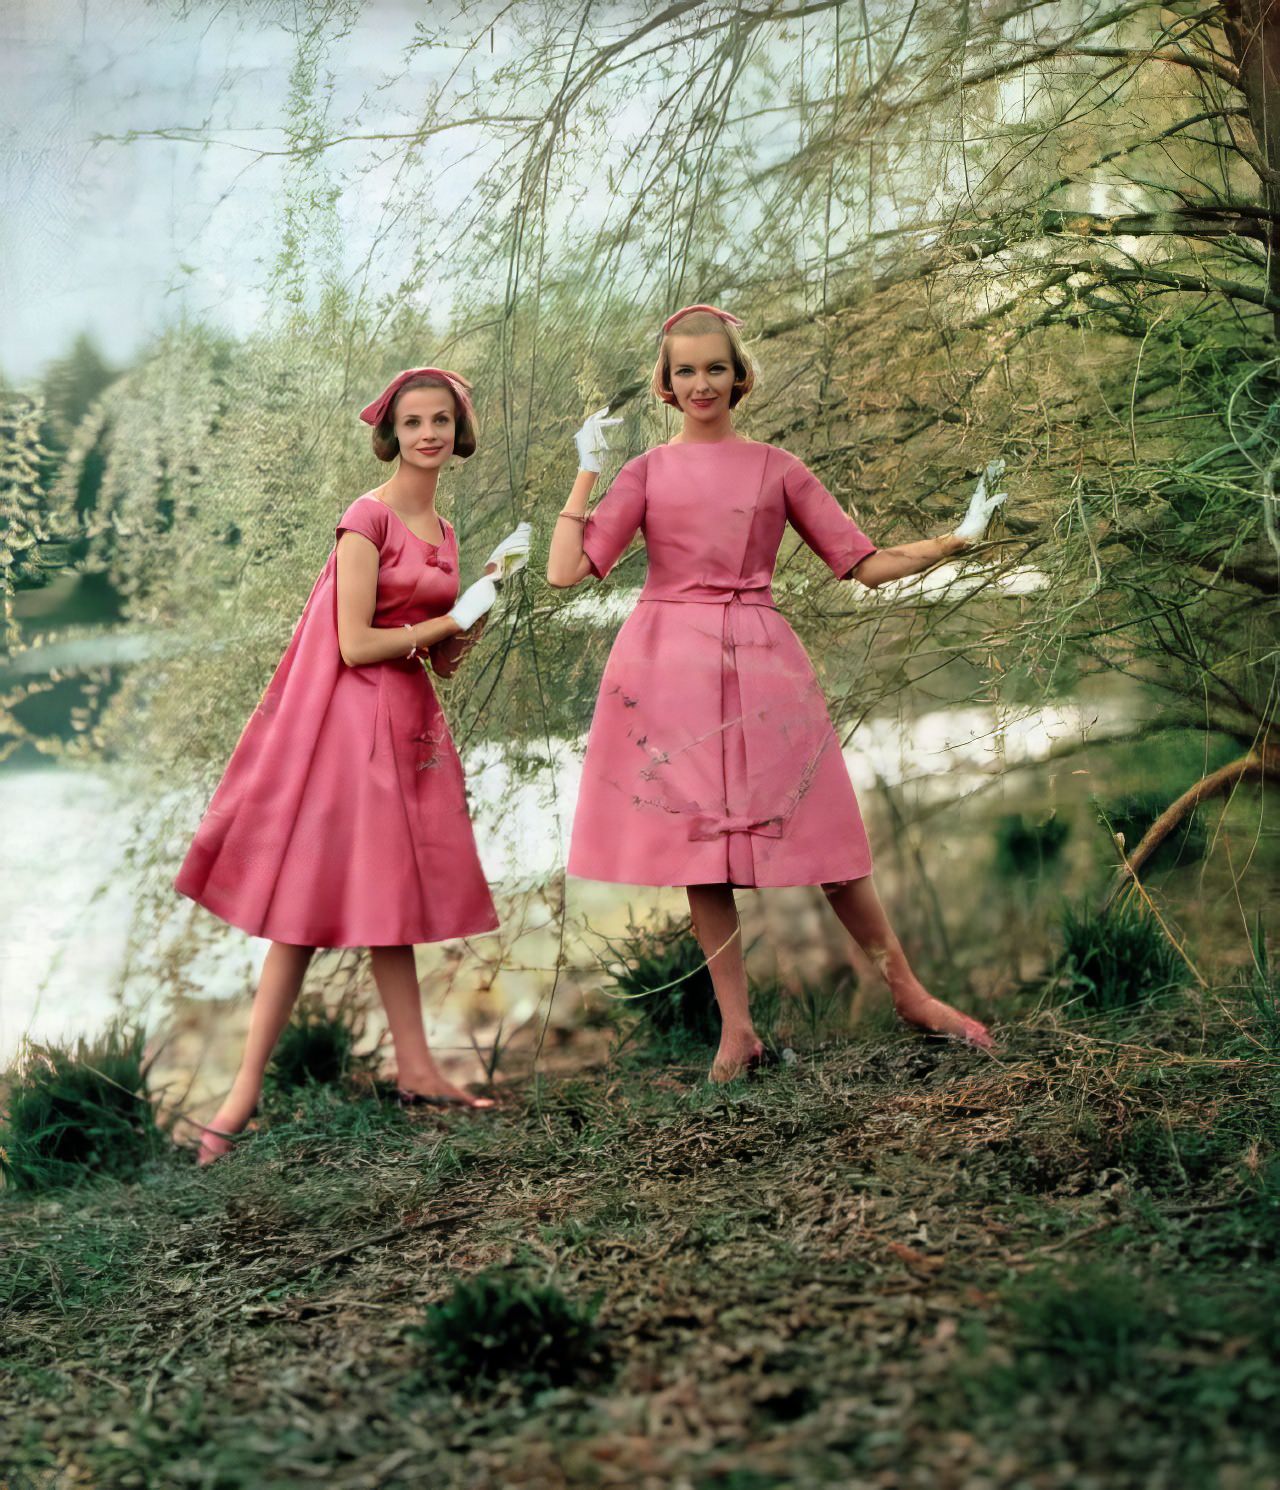 Iris Bianchi and Lois Wideman in pink satin party dresses, 1958.